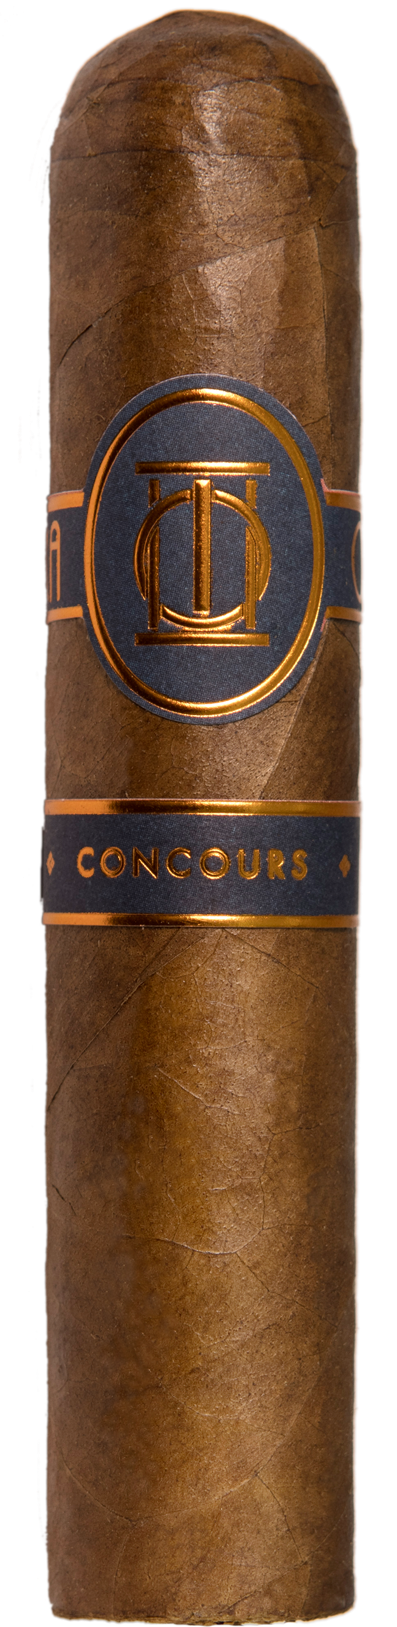 Laura Chavin Concours Robusto - Edition 2019